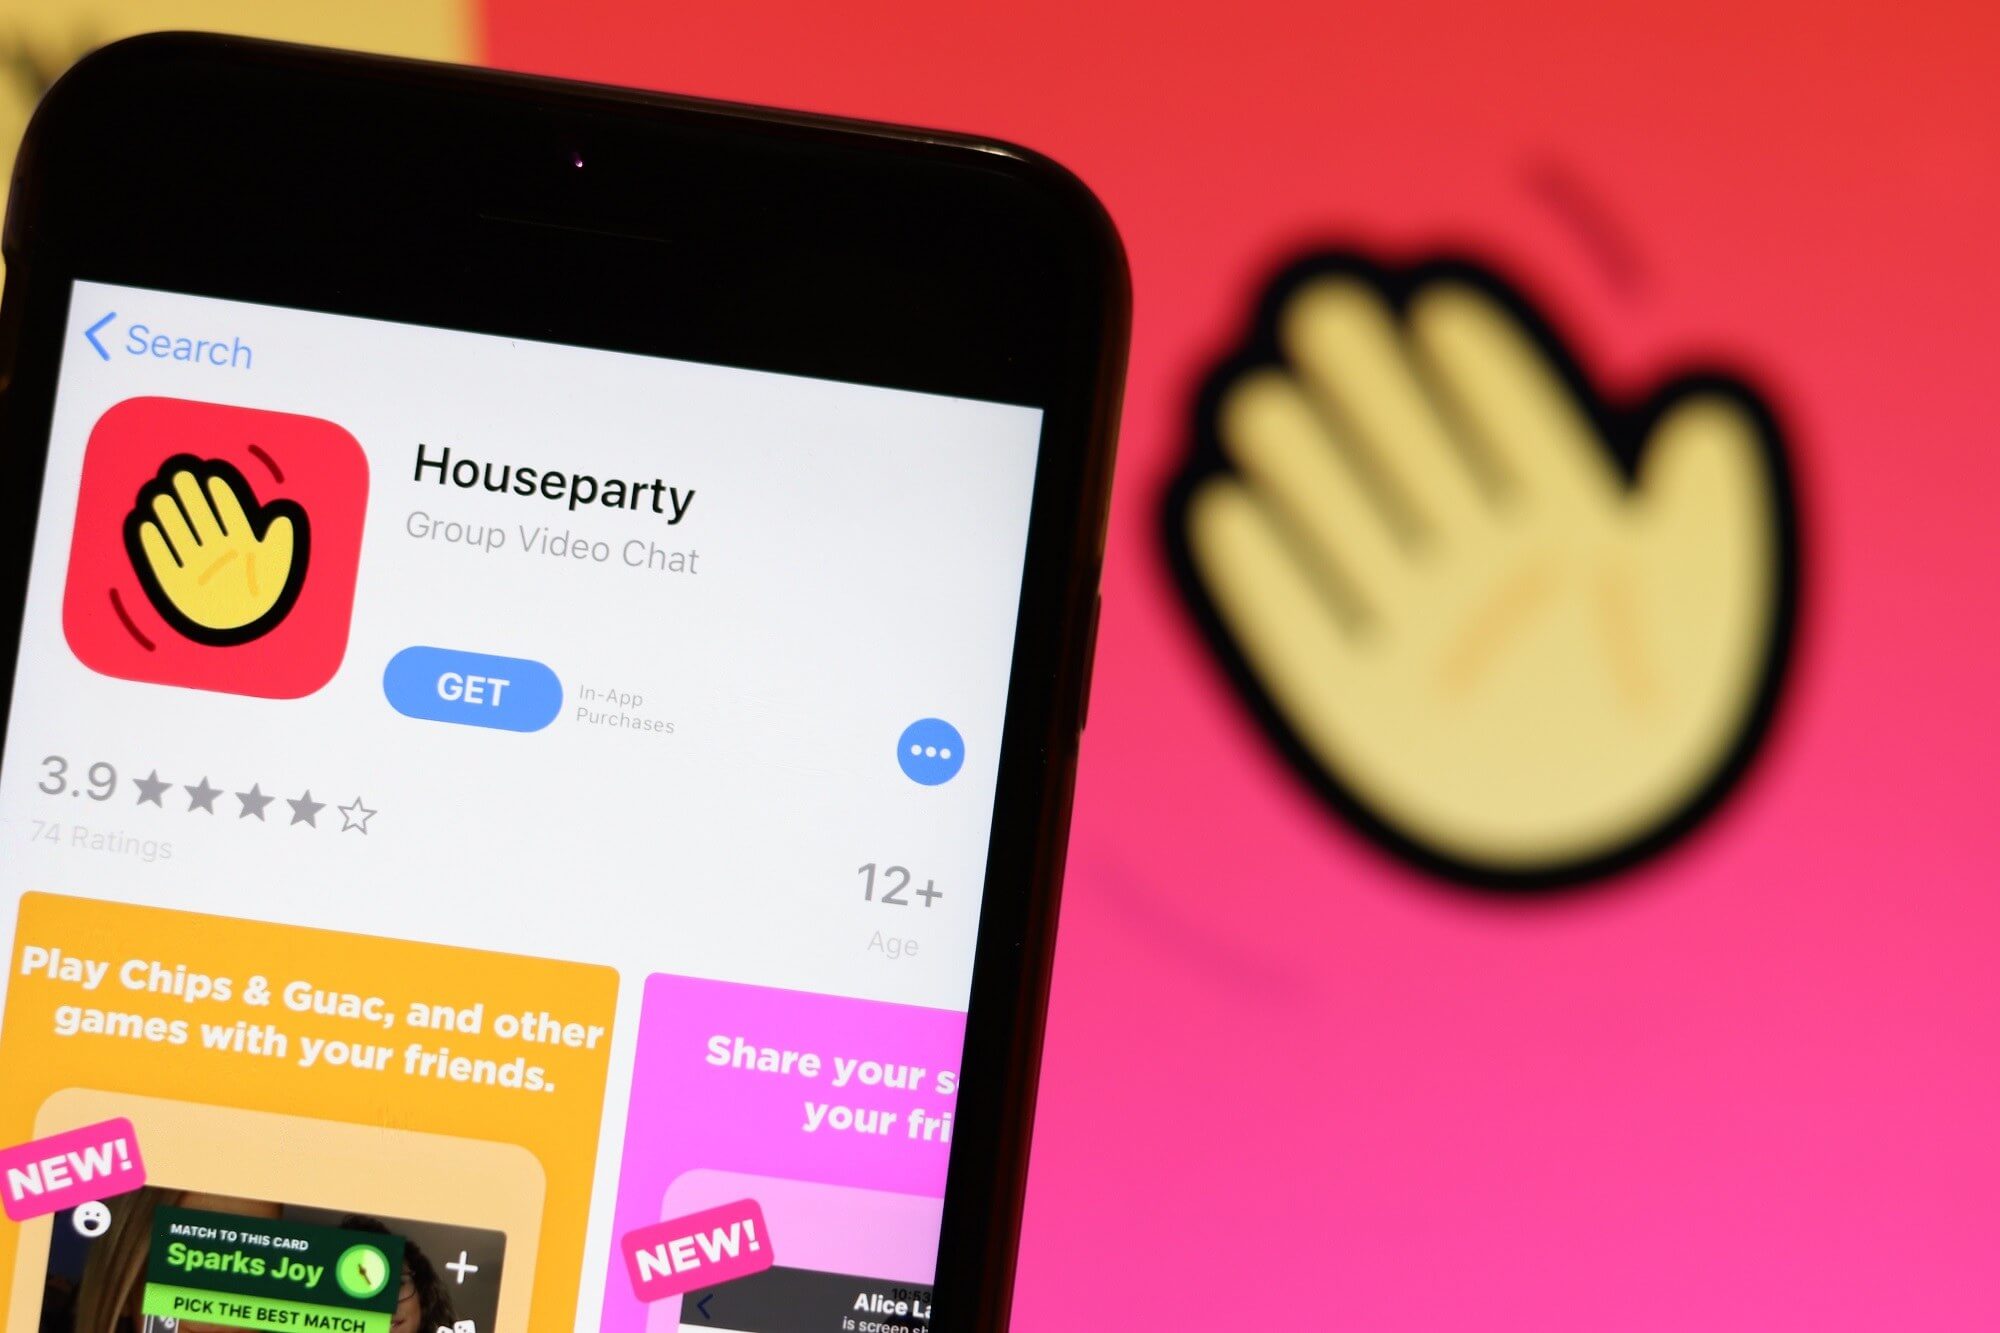 Houseparty says it was victim of smear campaign, offers $1 million reward for proof